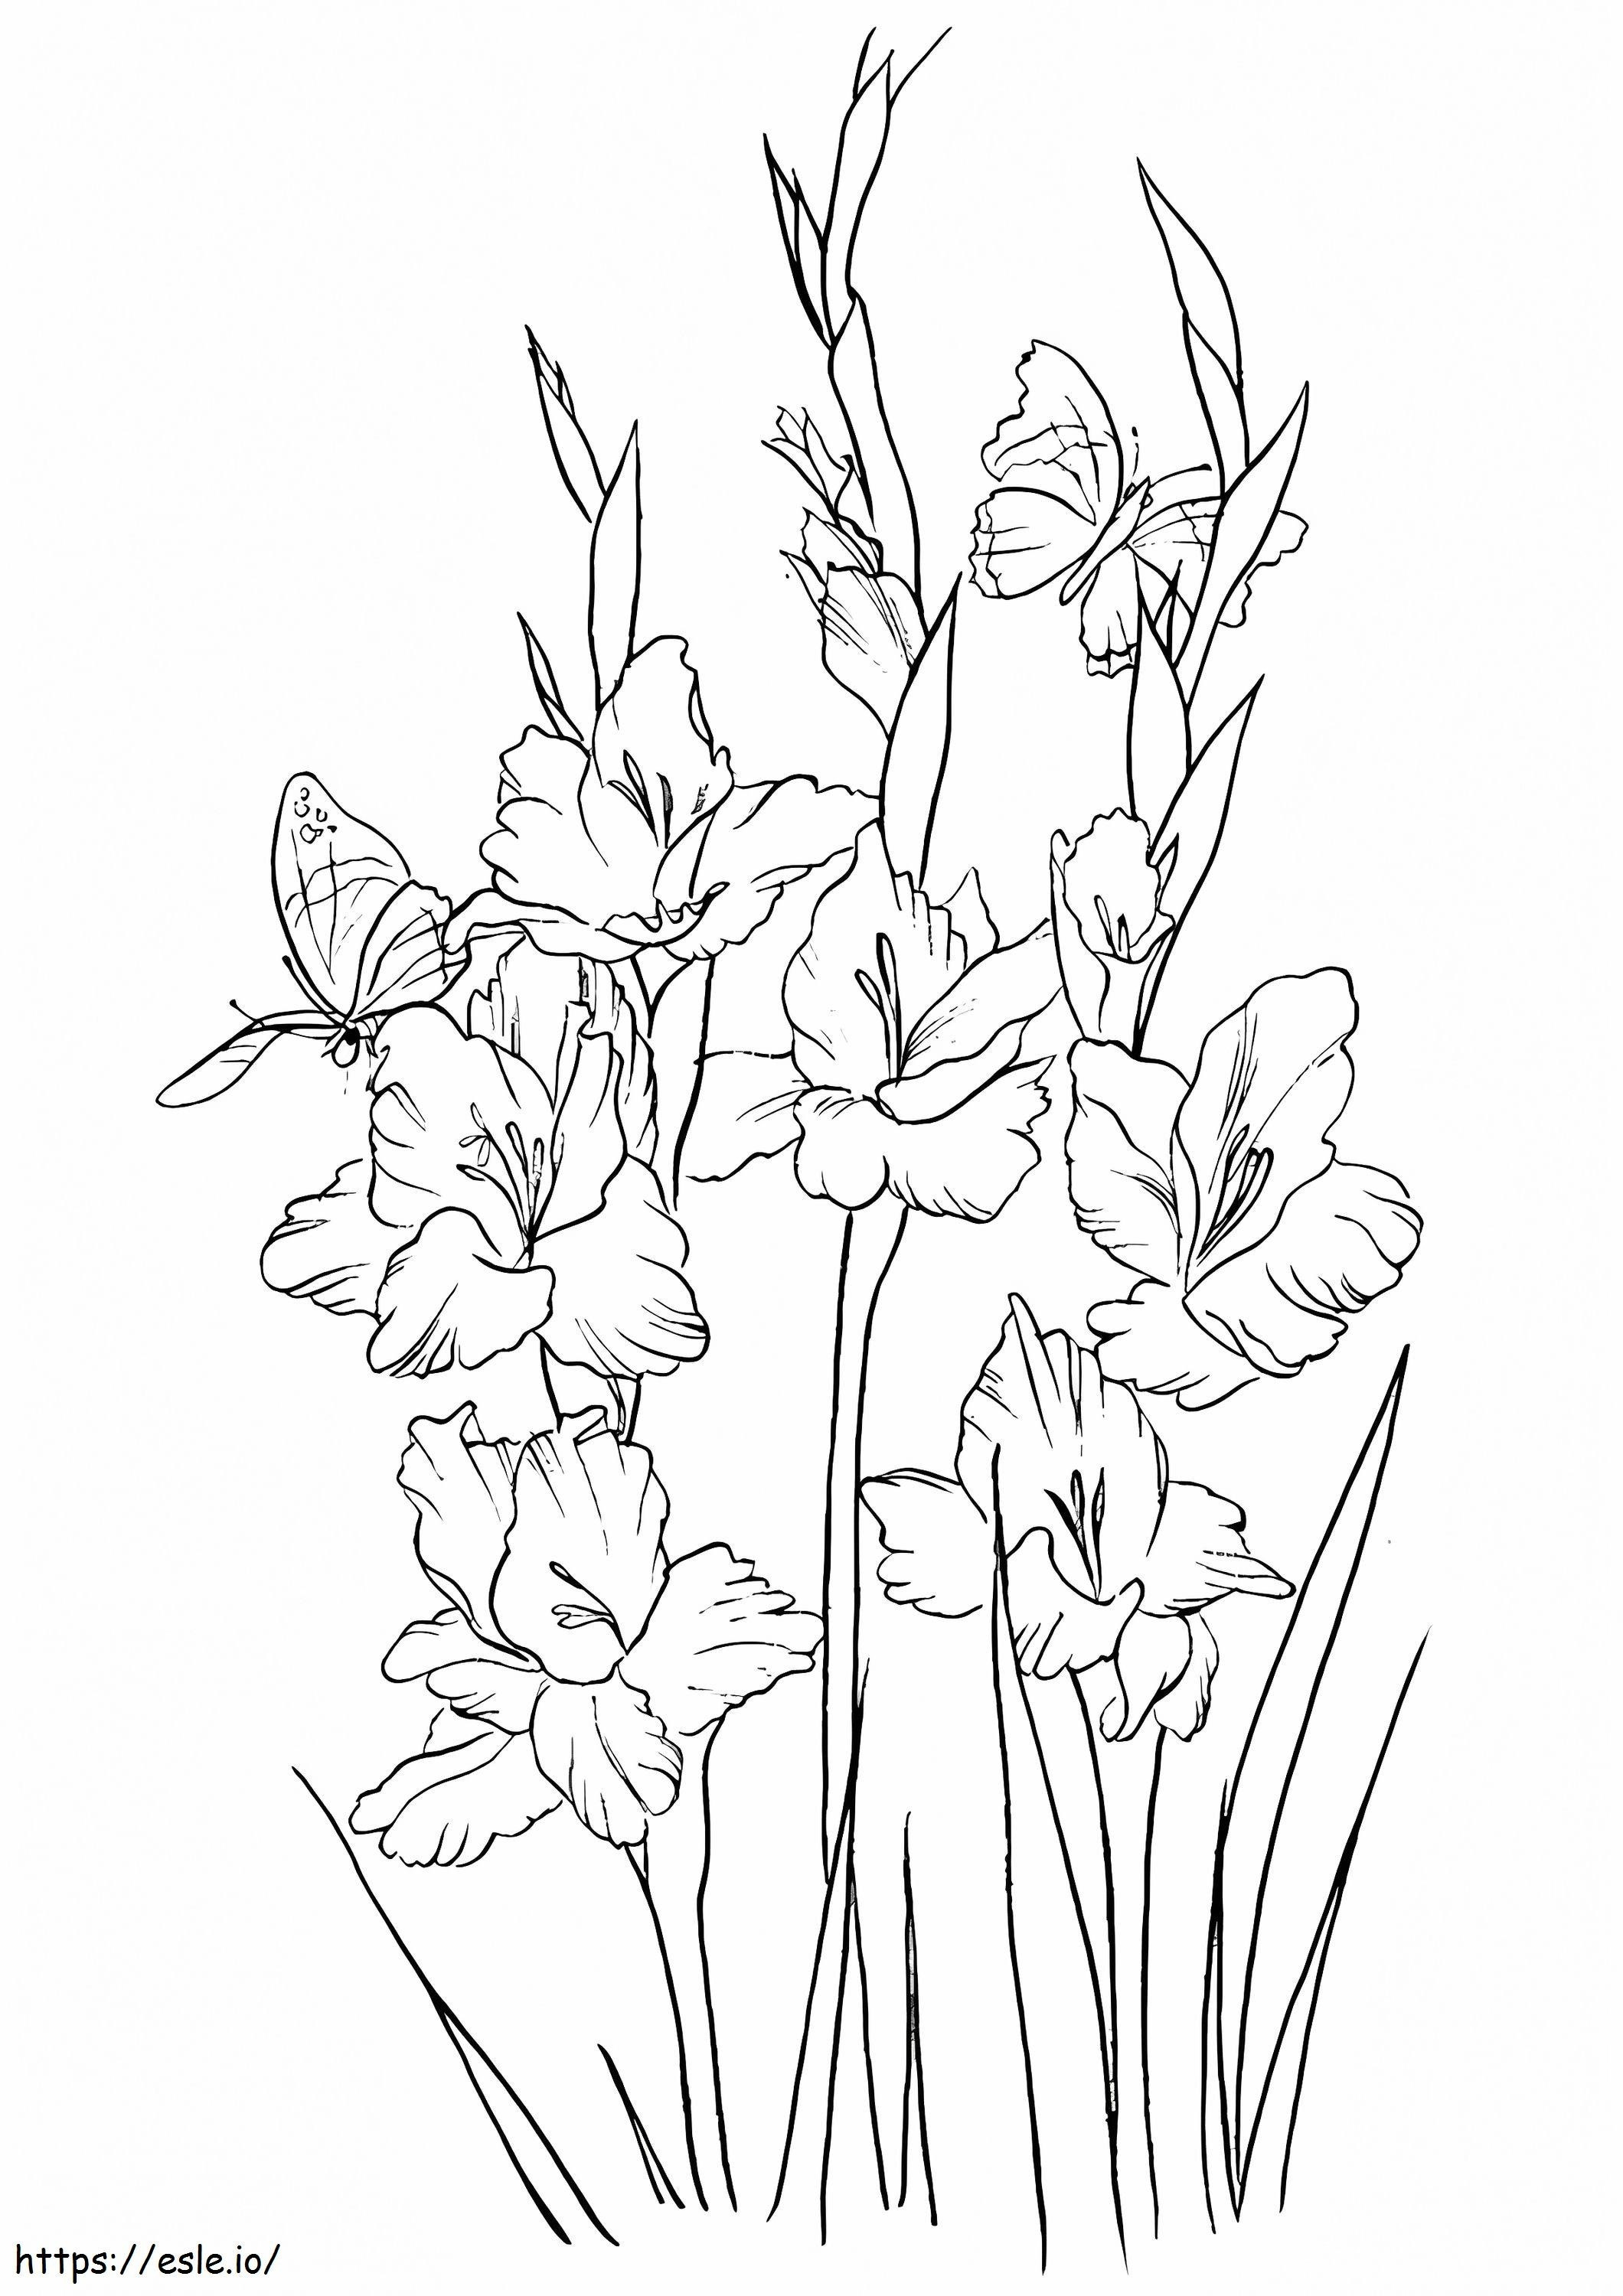 The Gladiolus A4 coloring page